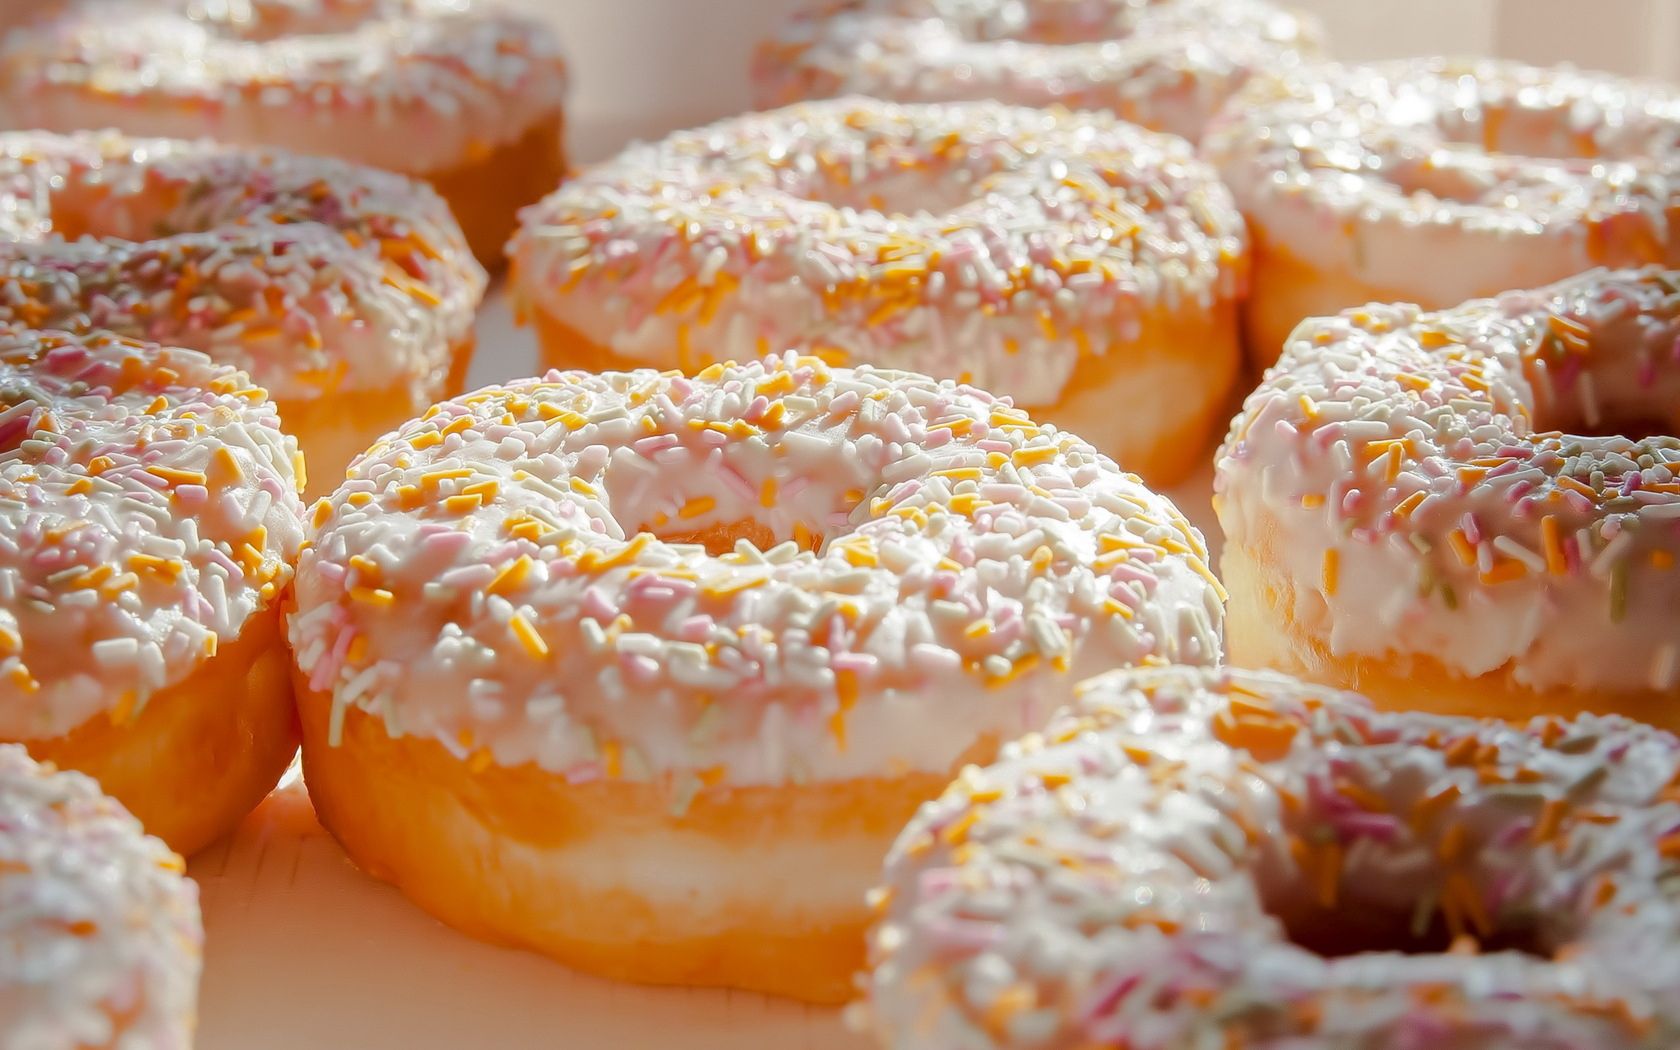 69727 download wallpaper food, macro, sweet, donuts, sprinkling, sprinkle screensavers and pictures for free